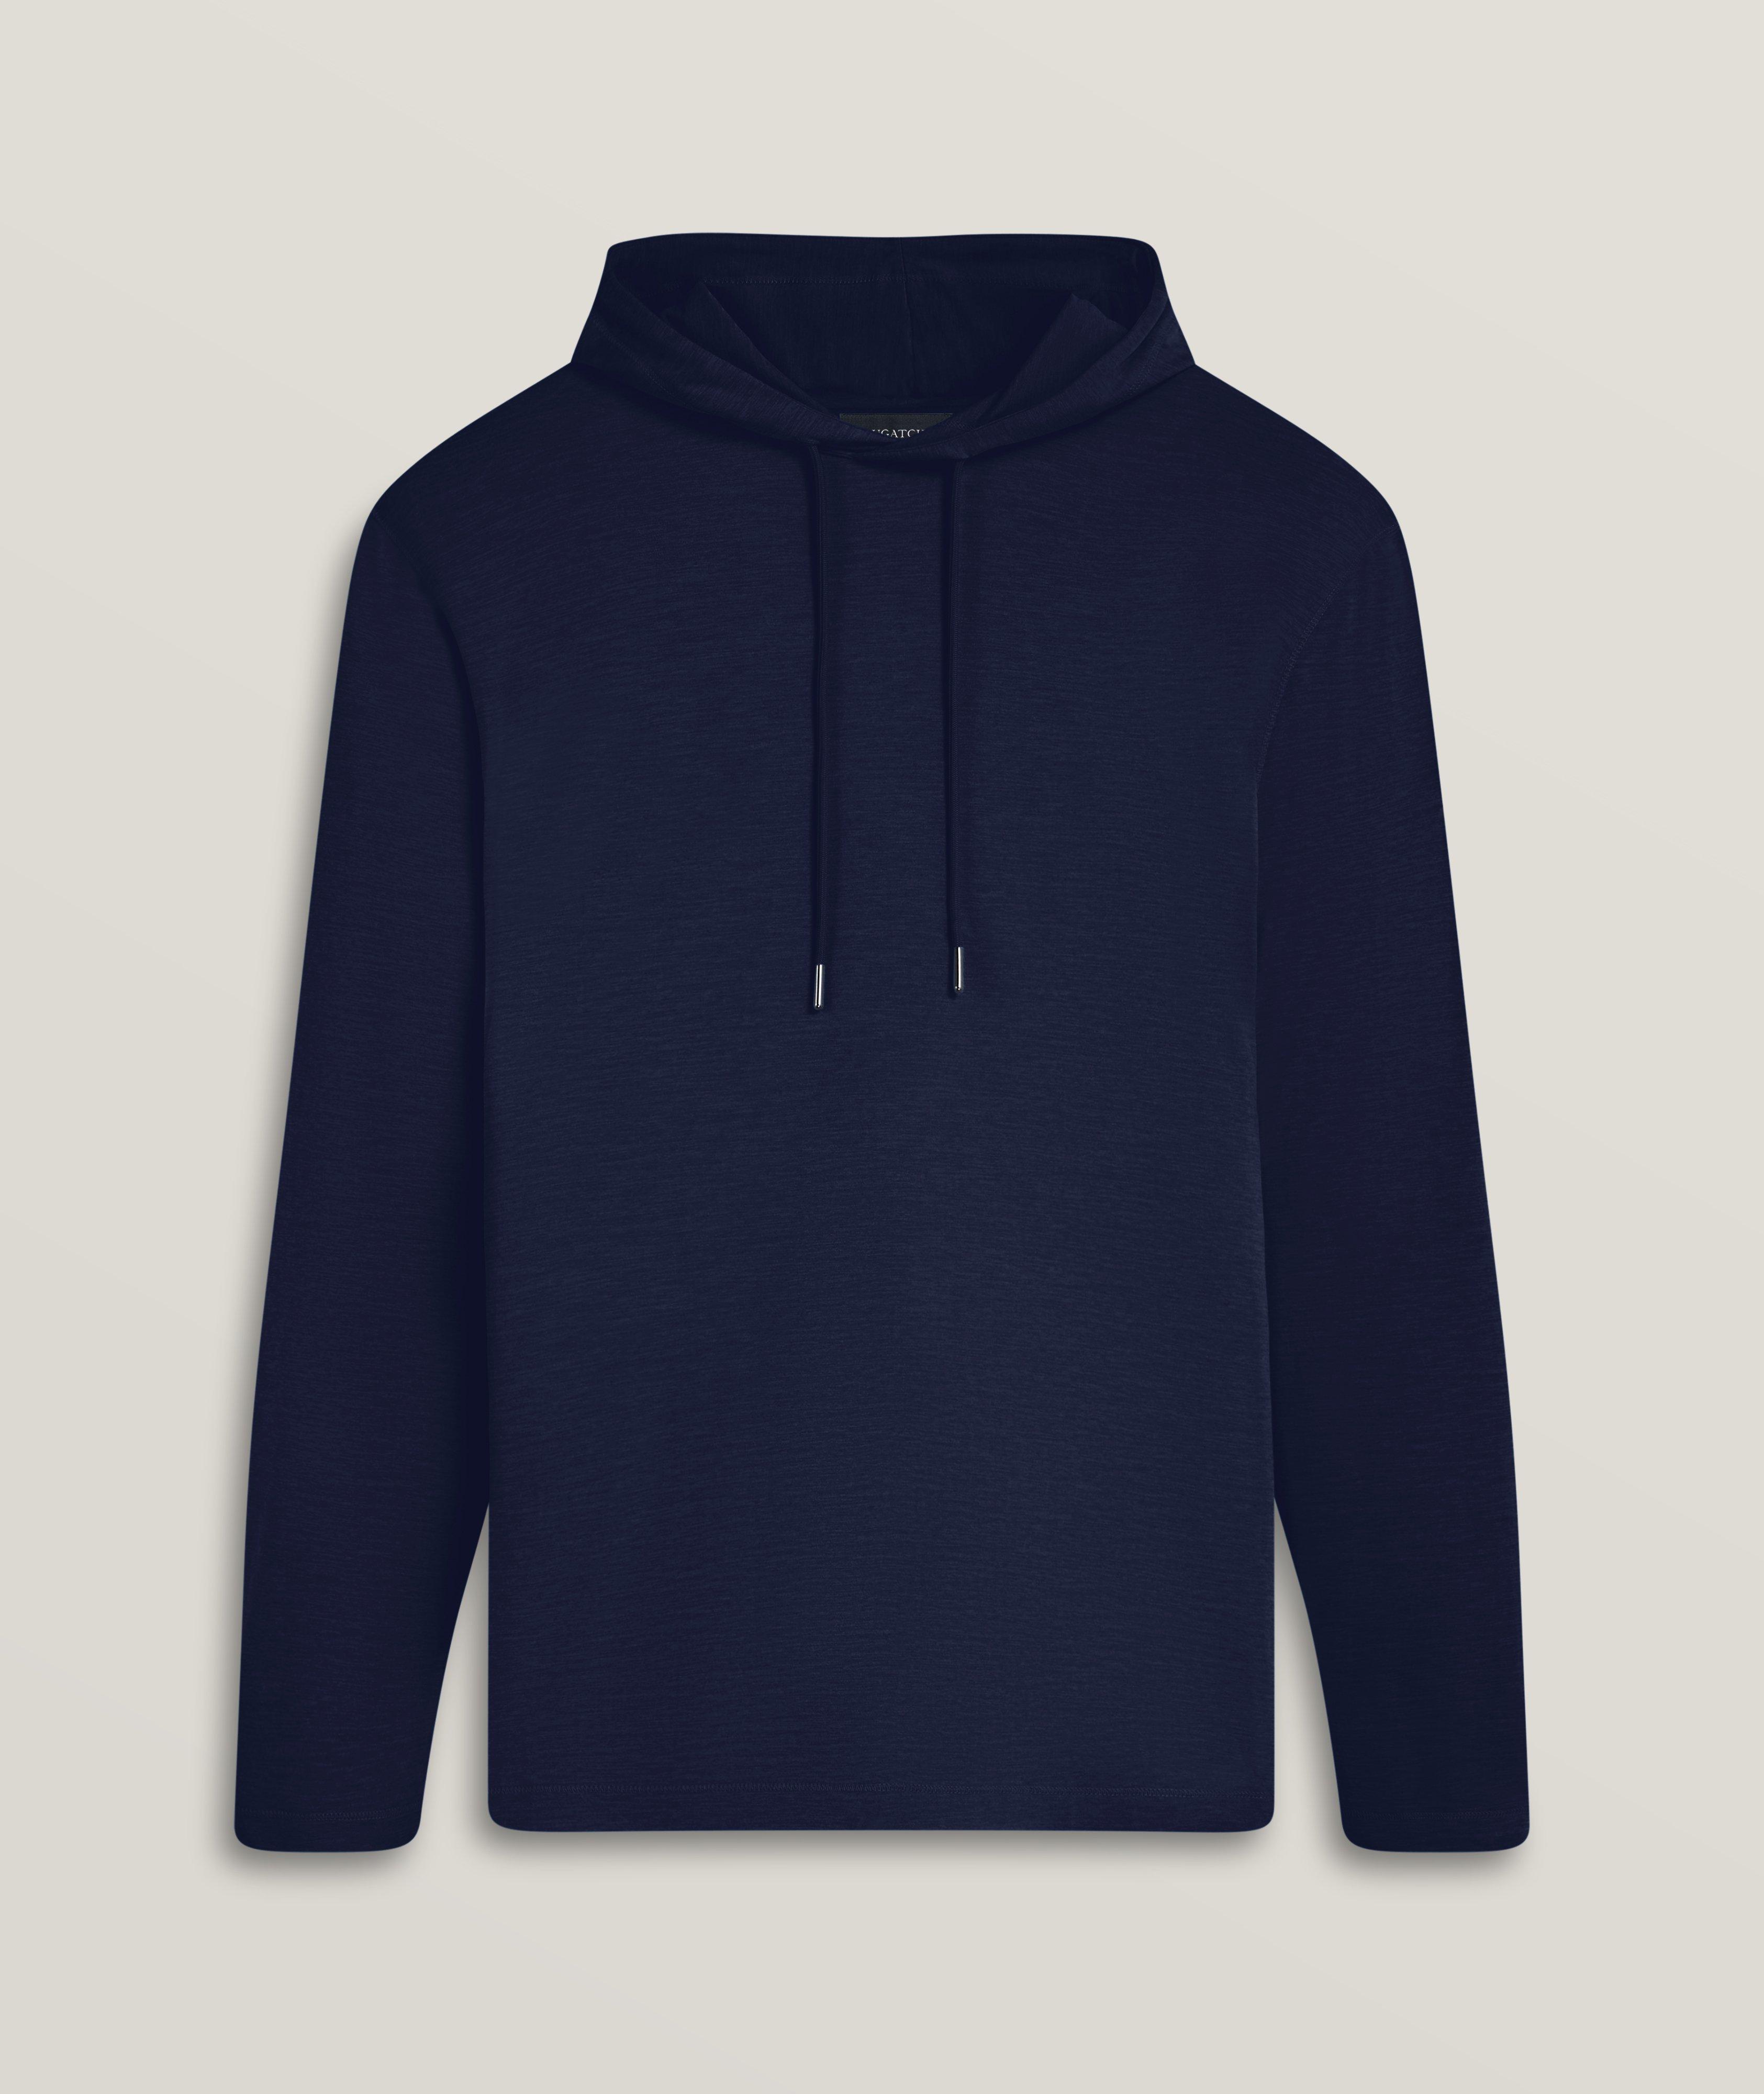 UV50 Performance Stretch-Fabric Hooded Sweater image 0